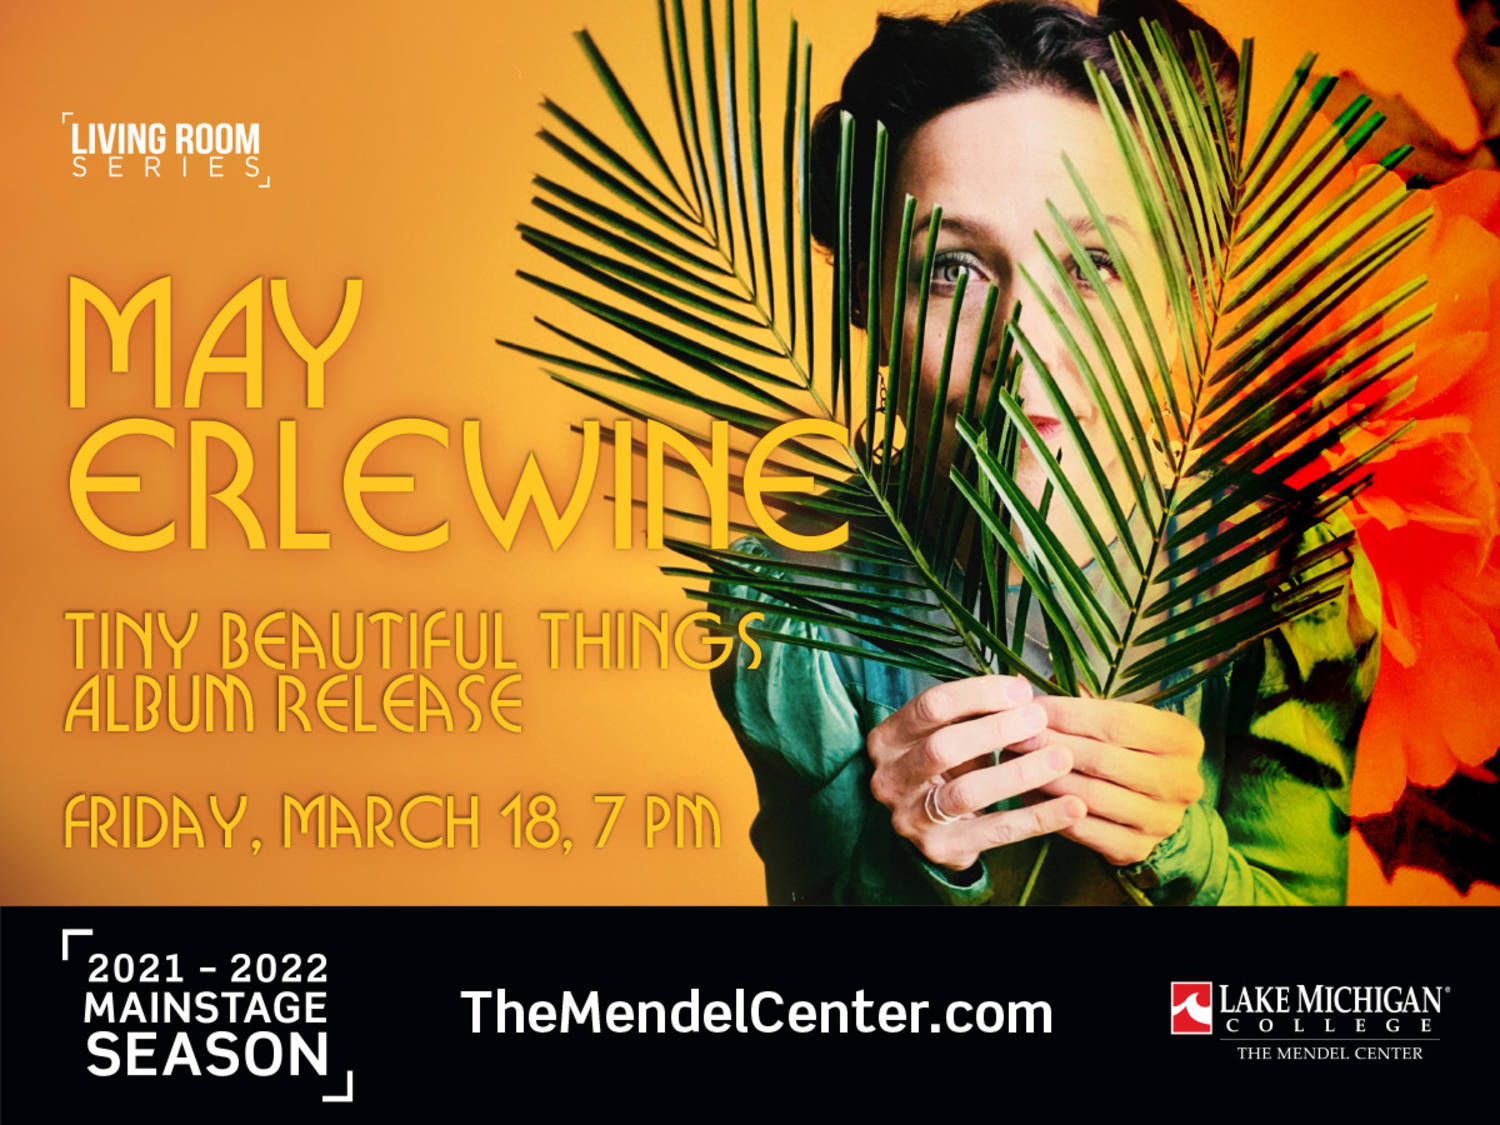 May Erlewine brings her Tiny Beautiful Things Album Release Tour to The Mendel Center in March